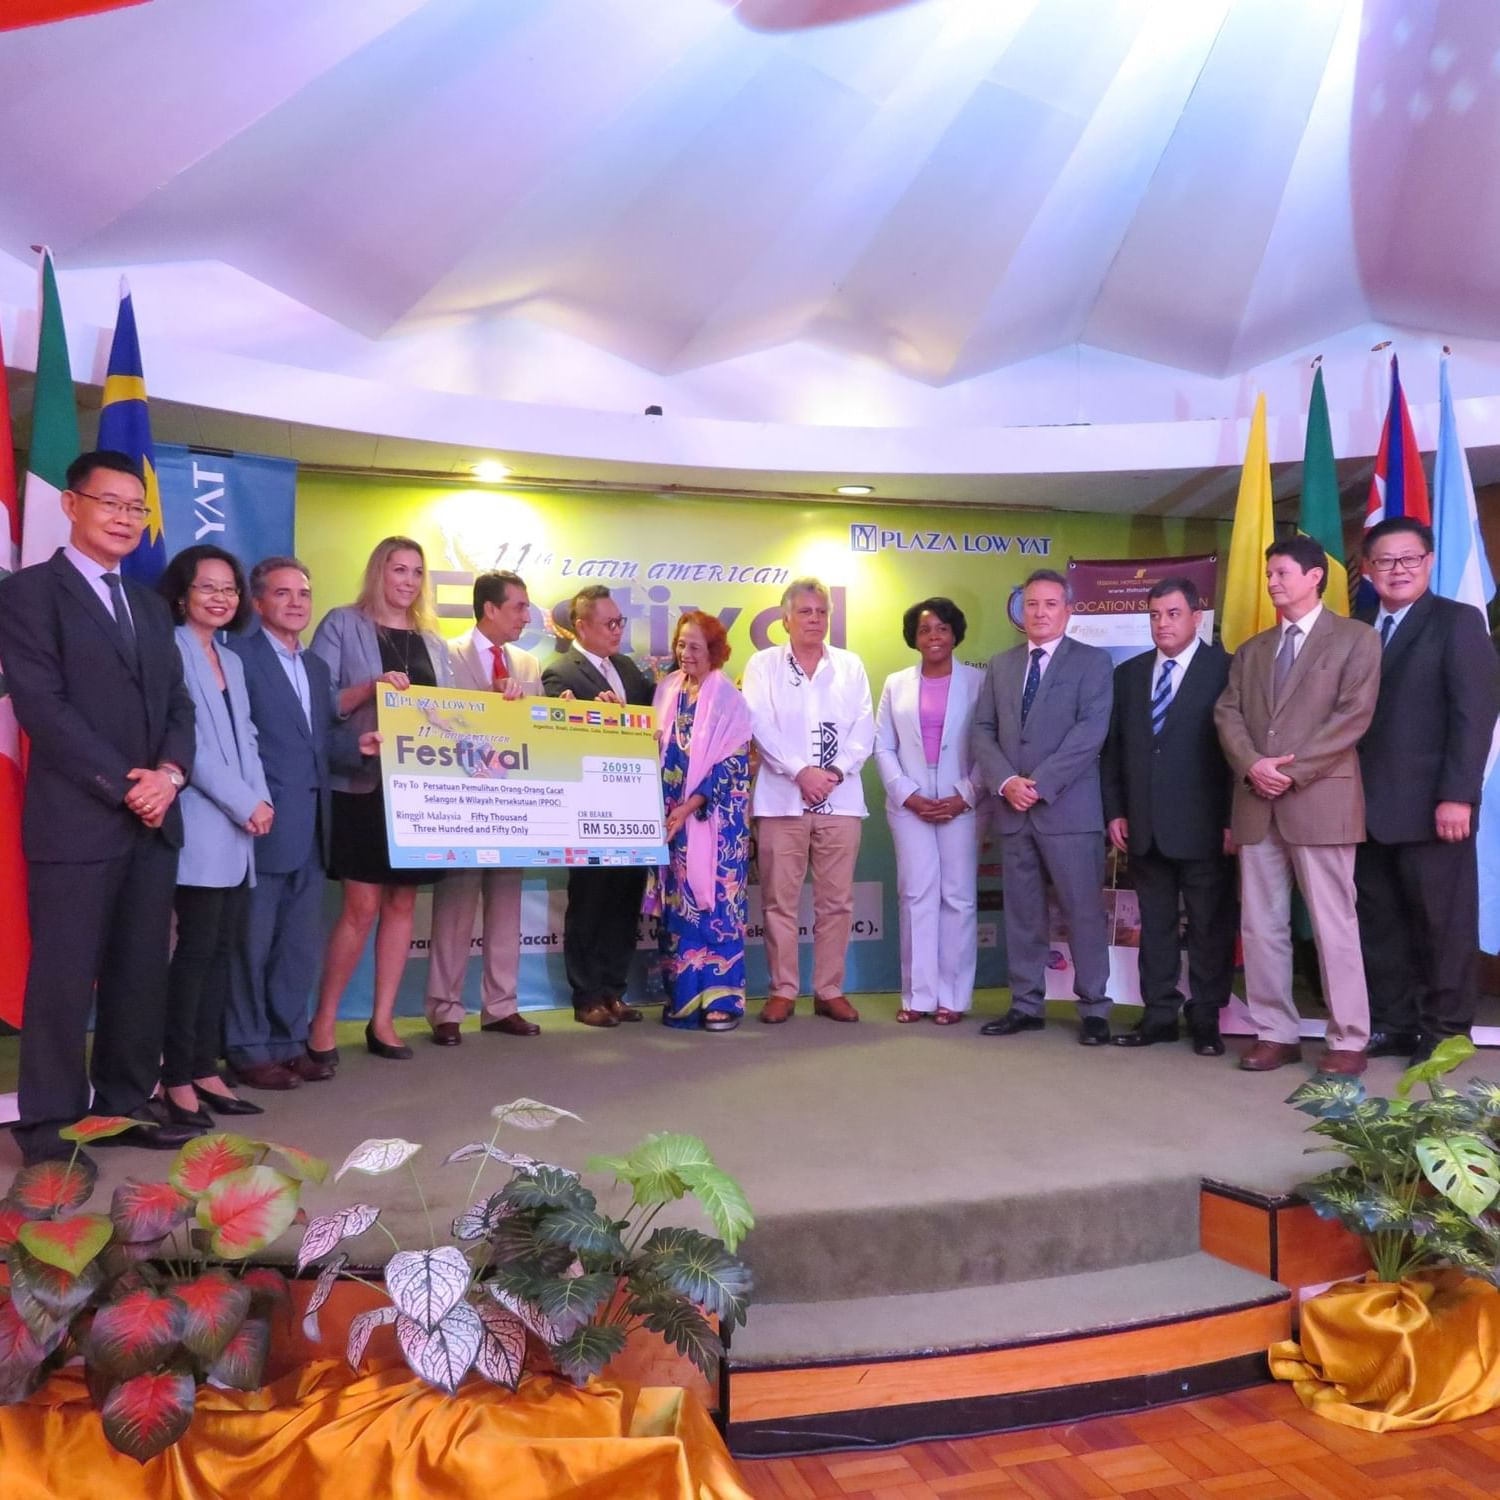 Cheque presentation ceremony at The Federal Kuala Lumpur
